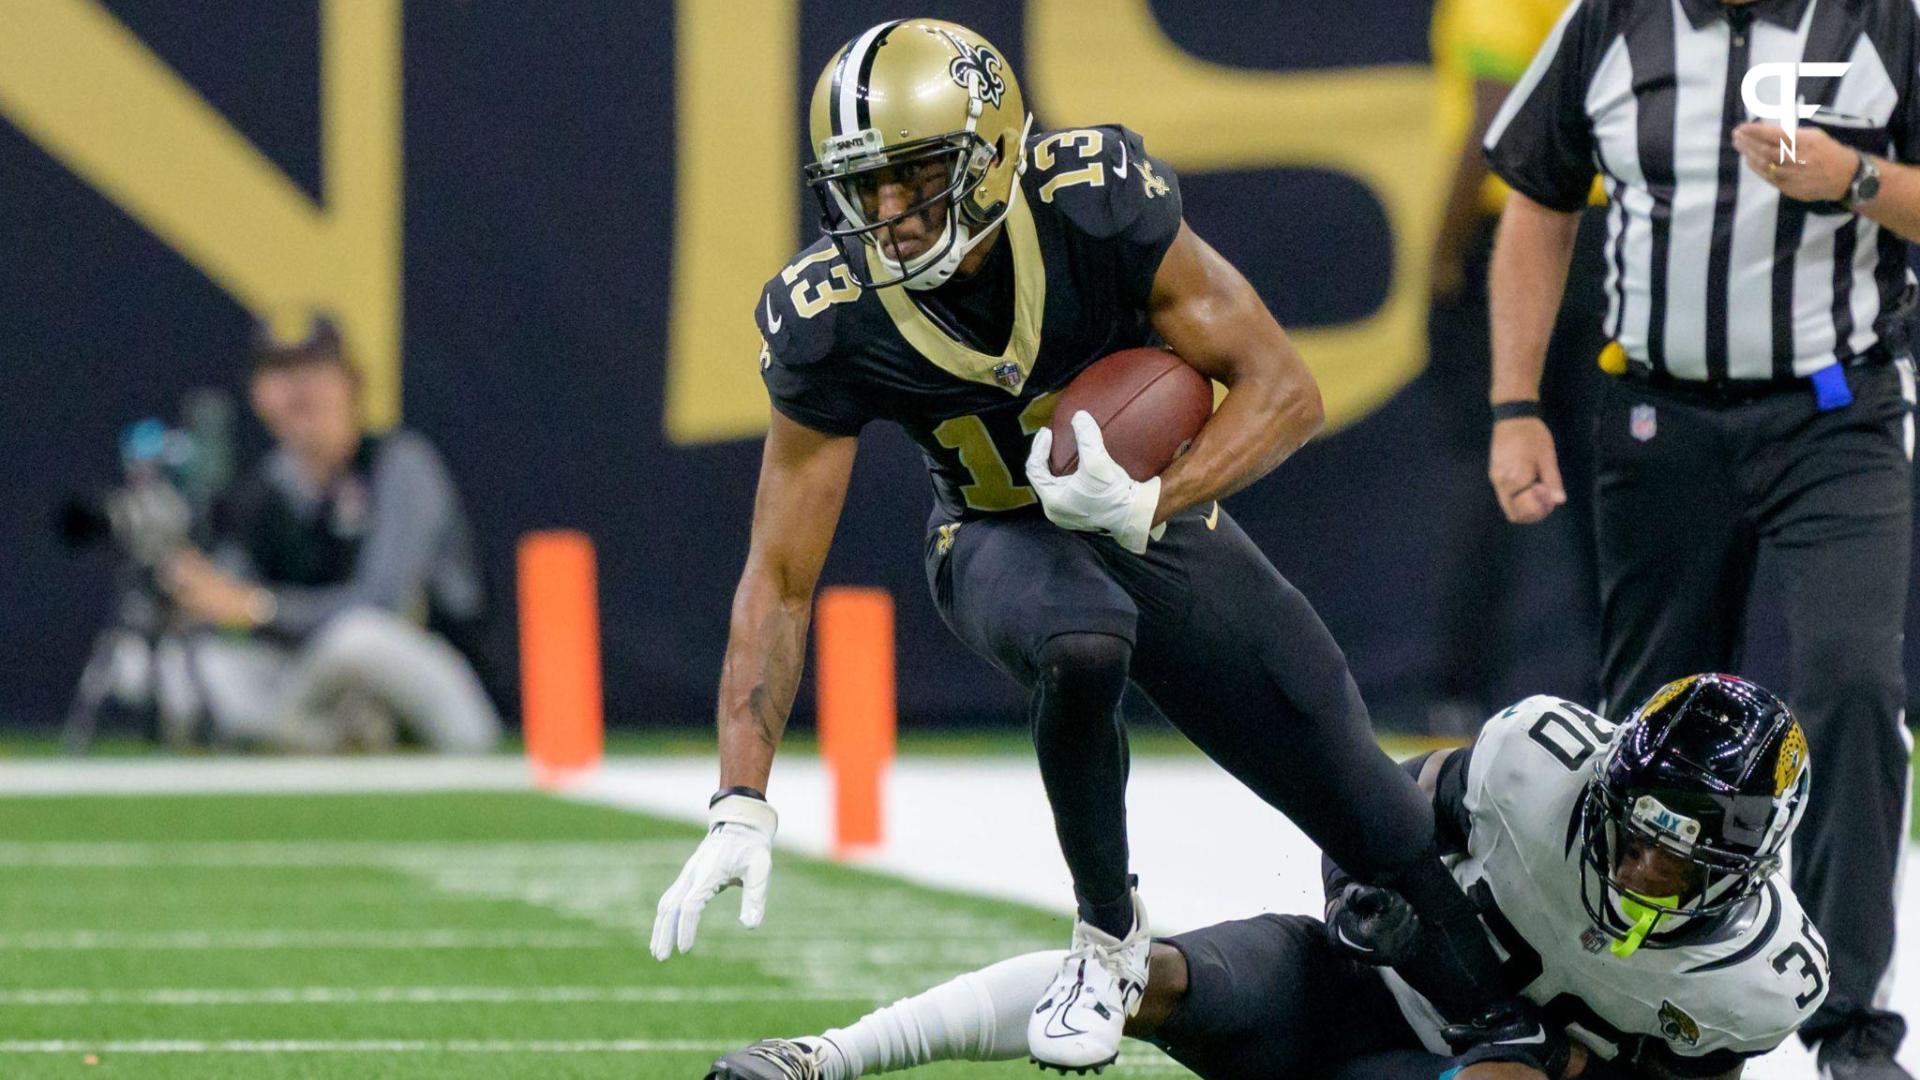 New Orleans Saints wide receiver Michael Thomas (13) makes a reception against Jacksonville Jaguars cornerback Montaric Brown (30) during the third quarter at the Caesars Superdome.